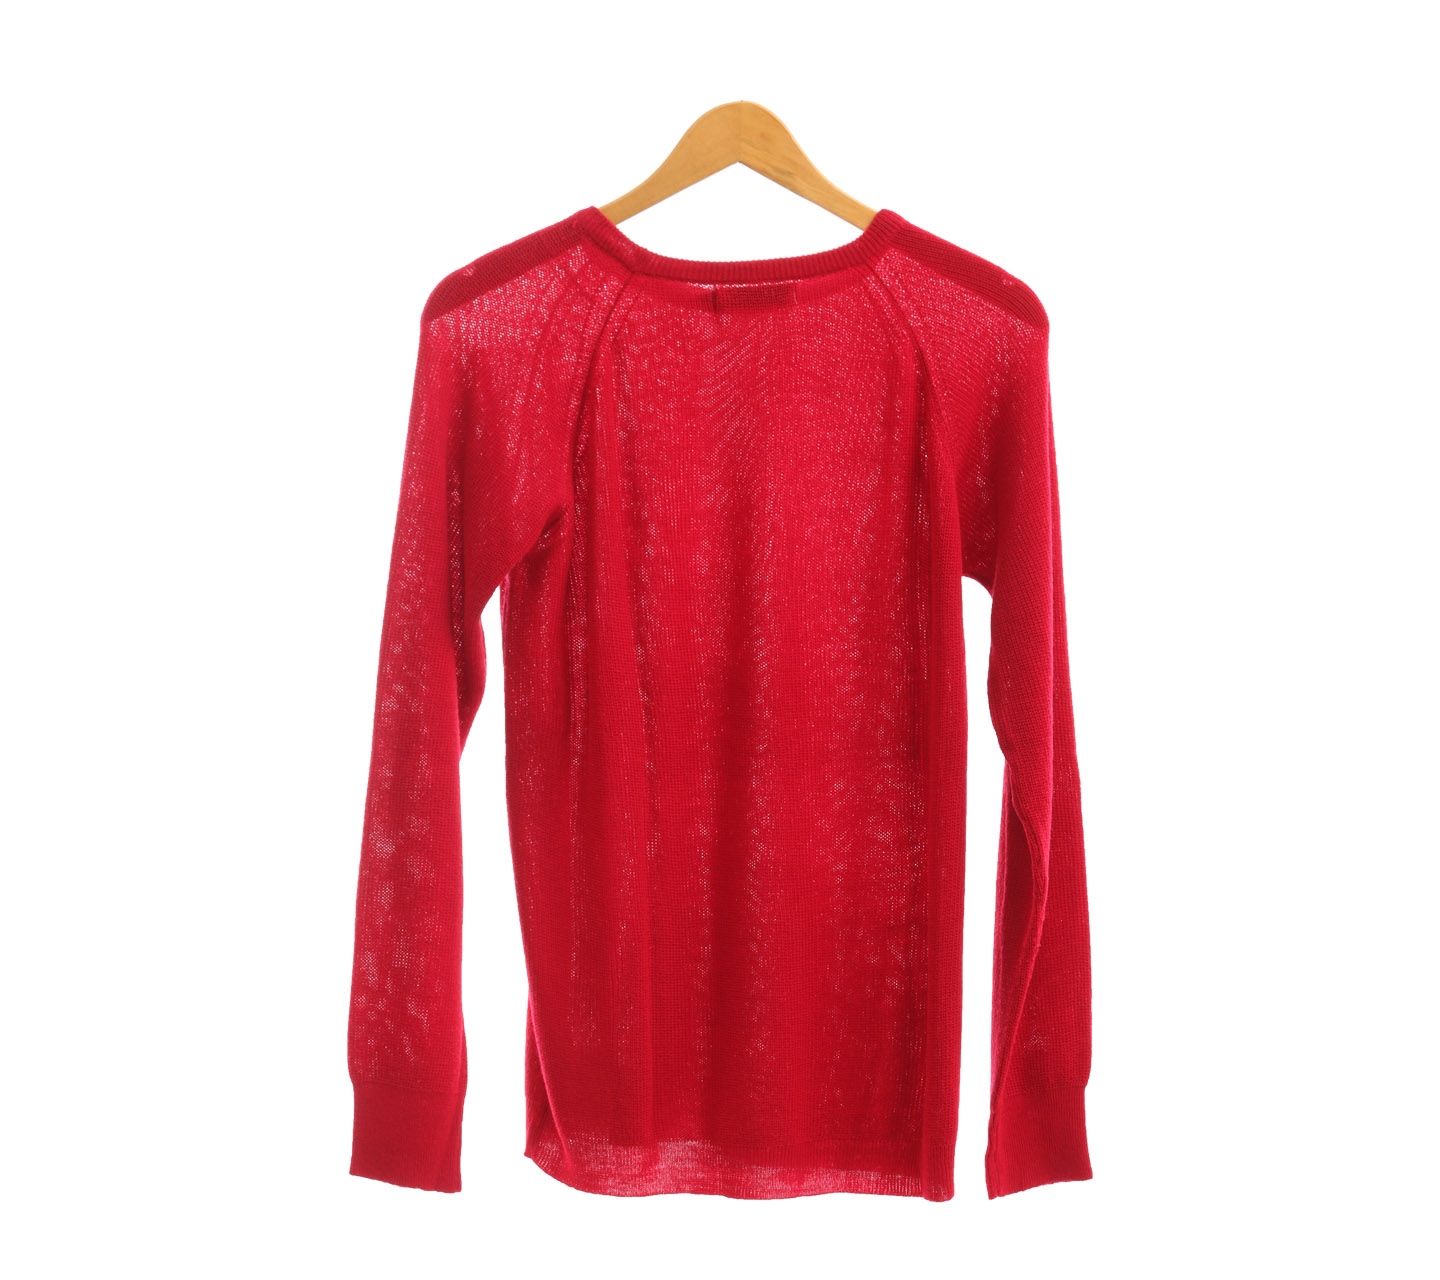 Cotton Ink Red Knit Sweater